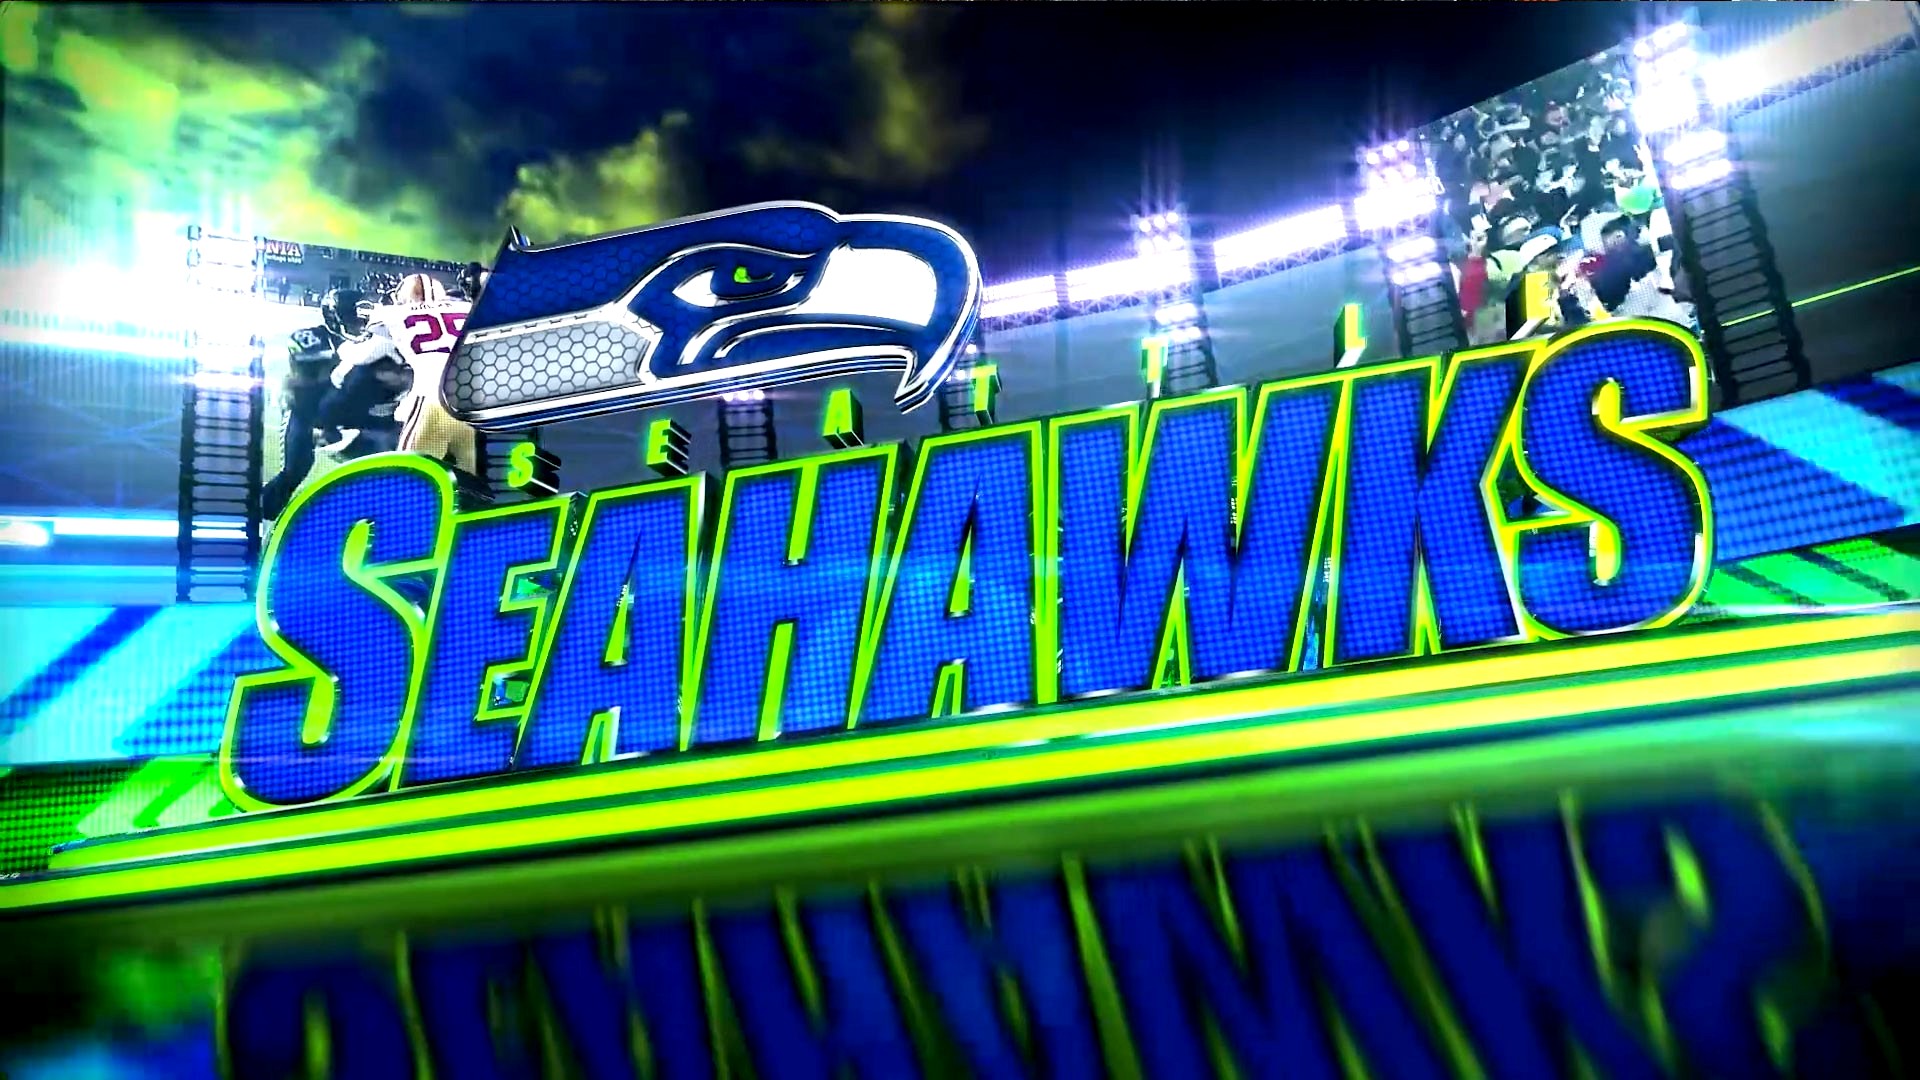 Seattle Seahawks Logo Desktop Wallpapers with high-resolution 1920x1080 pixel. You can use this wallpaper for your Mac or Windows Desktop Background, iPhone, Android or Tablet and another Smartphone device